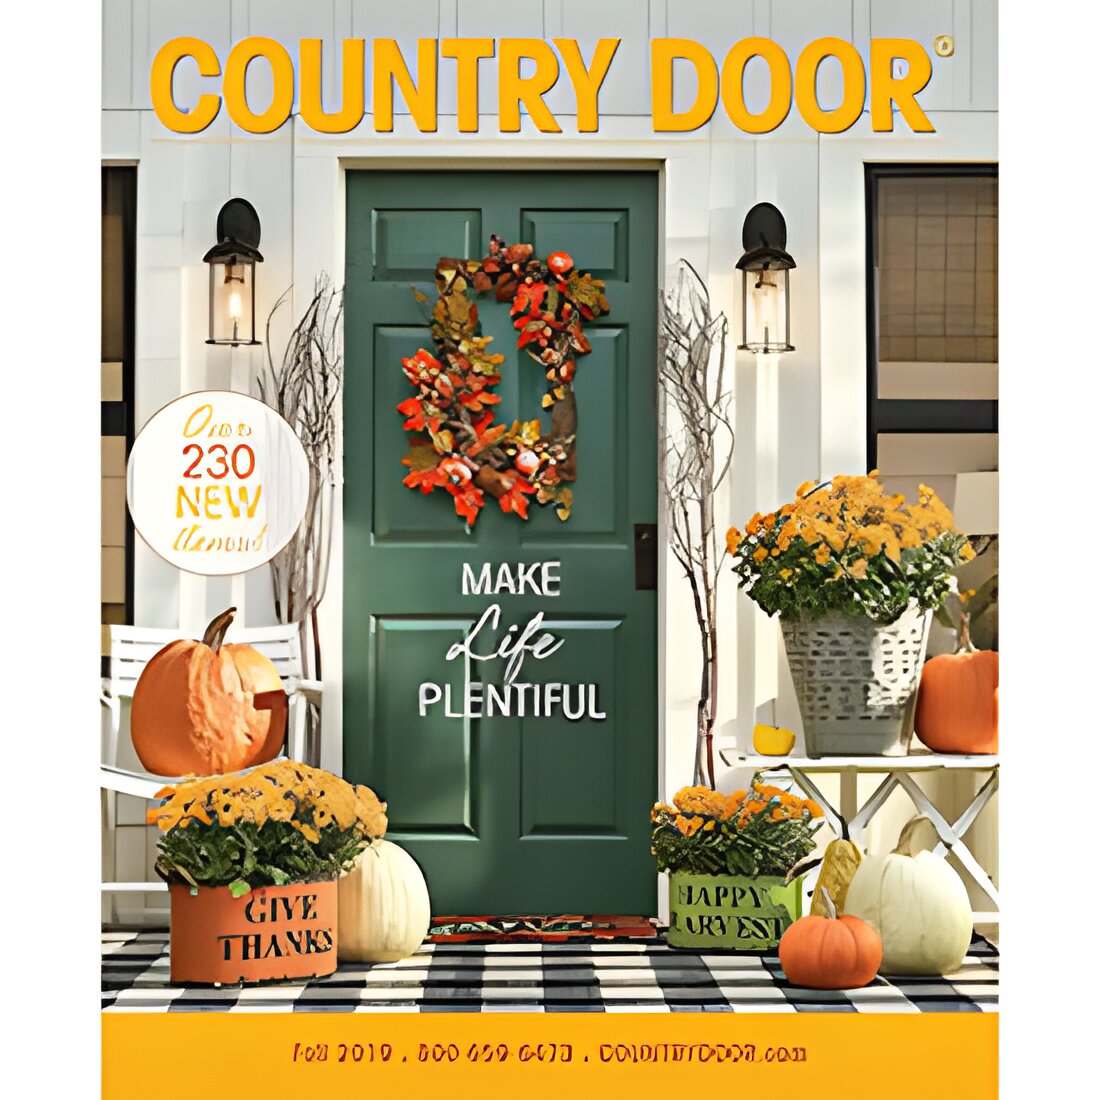 Free Country Door Catalog By Mail